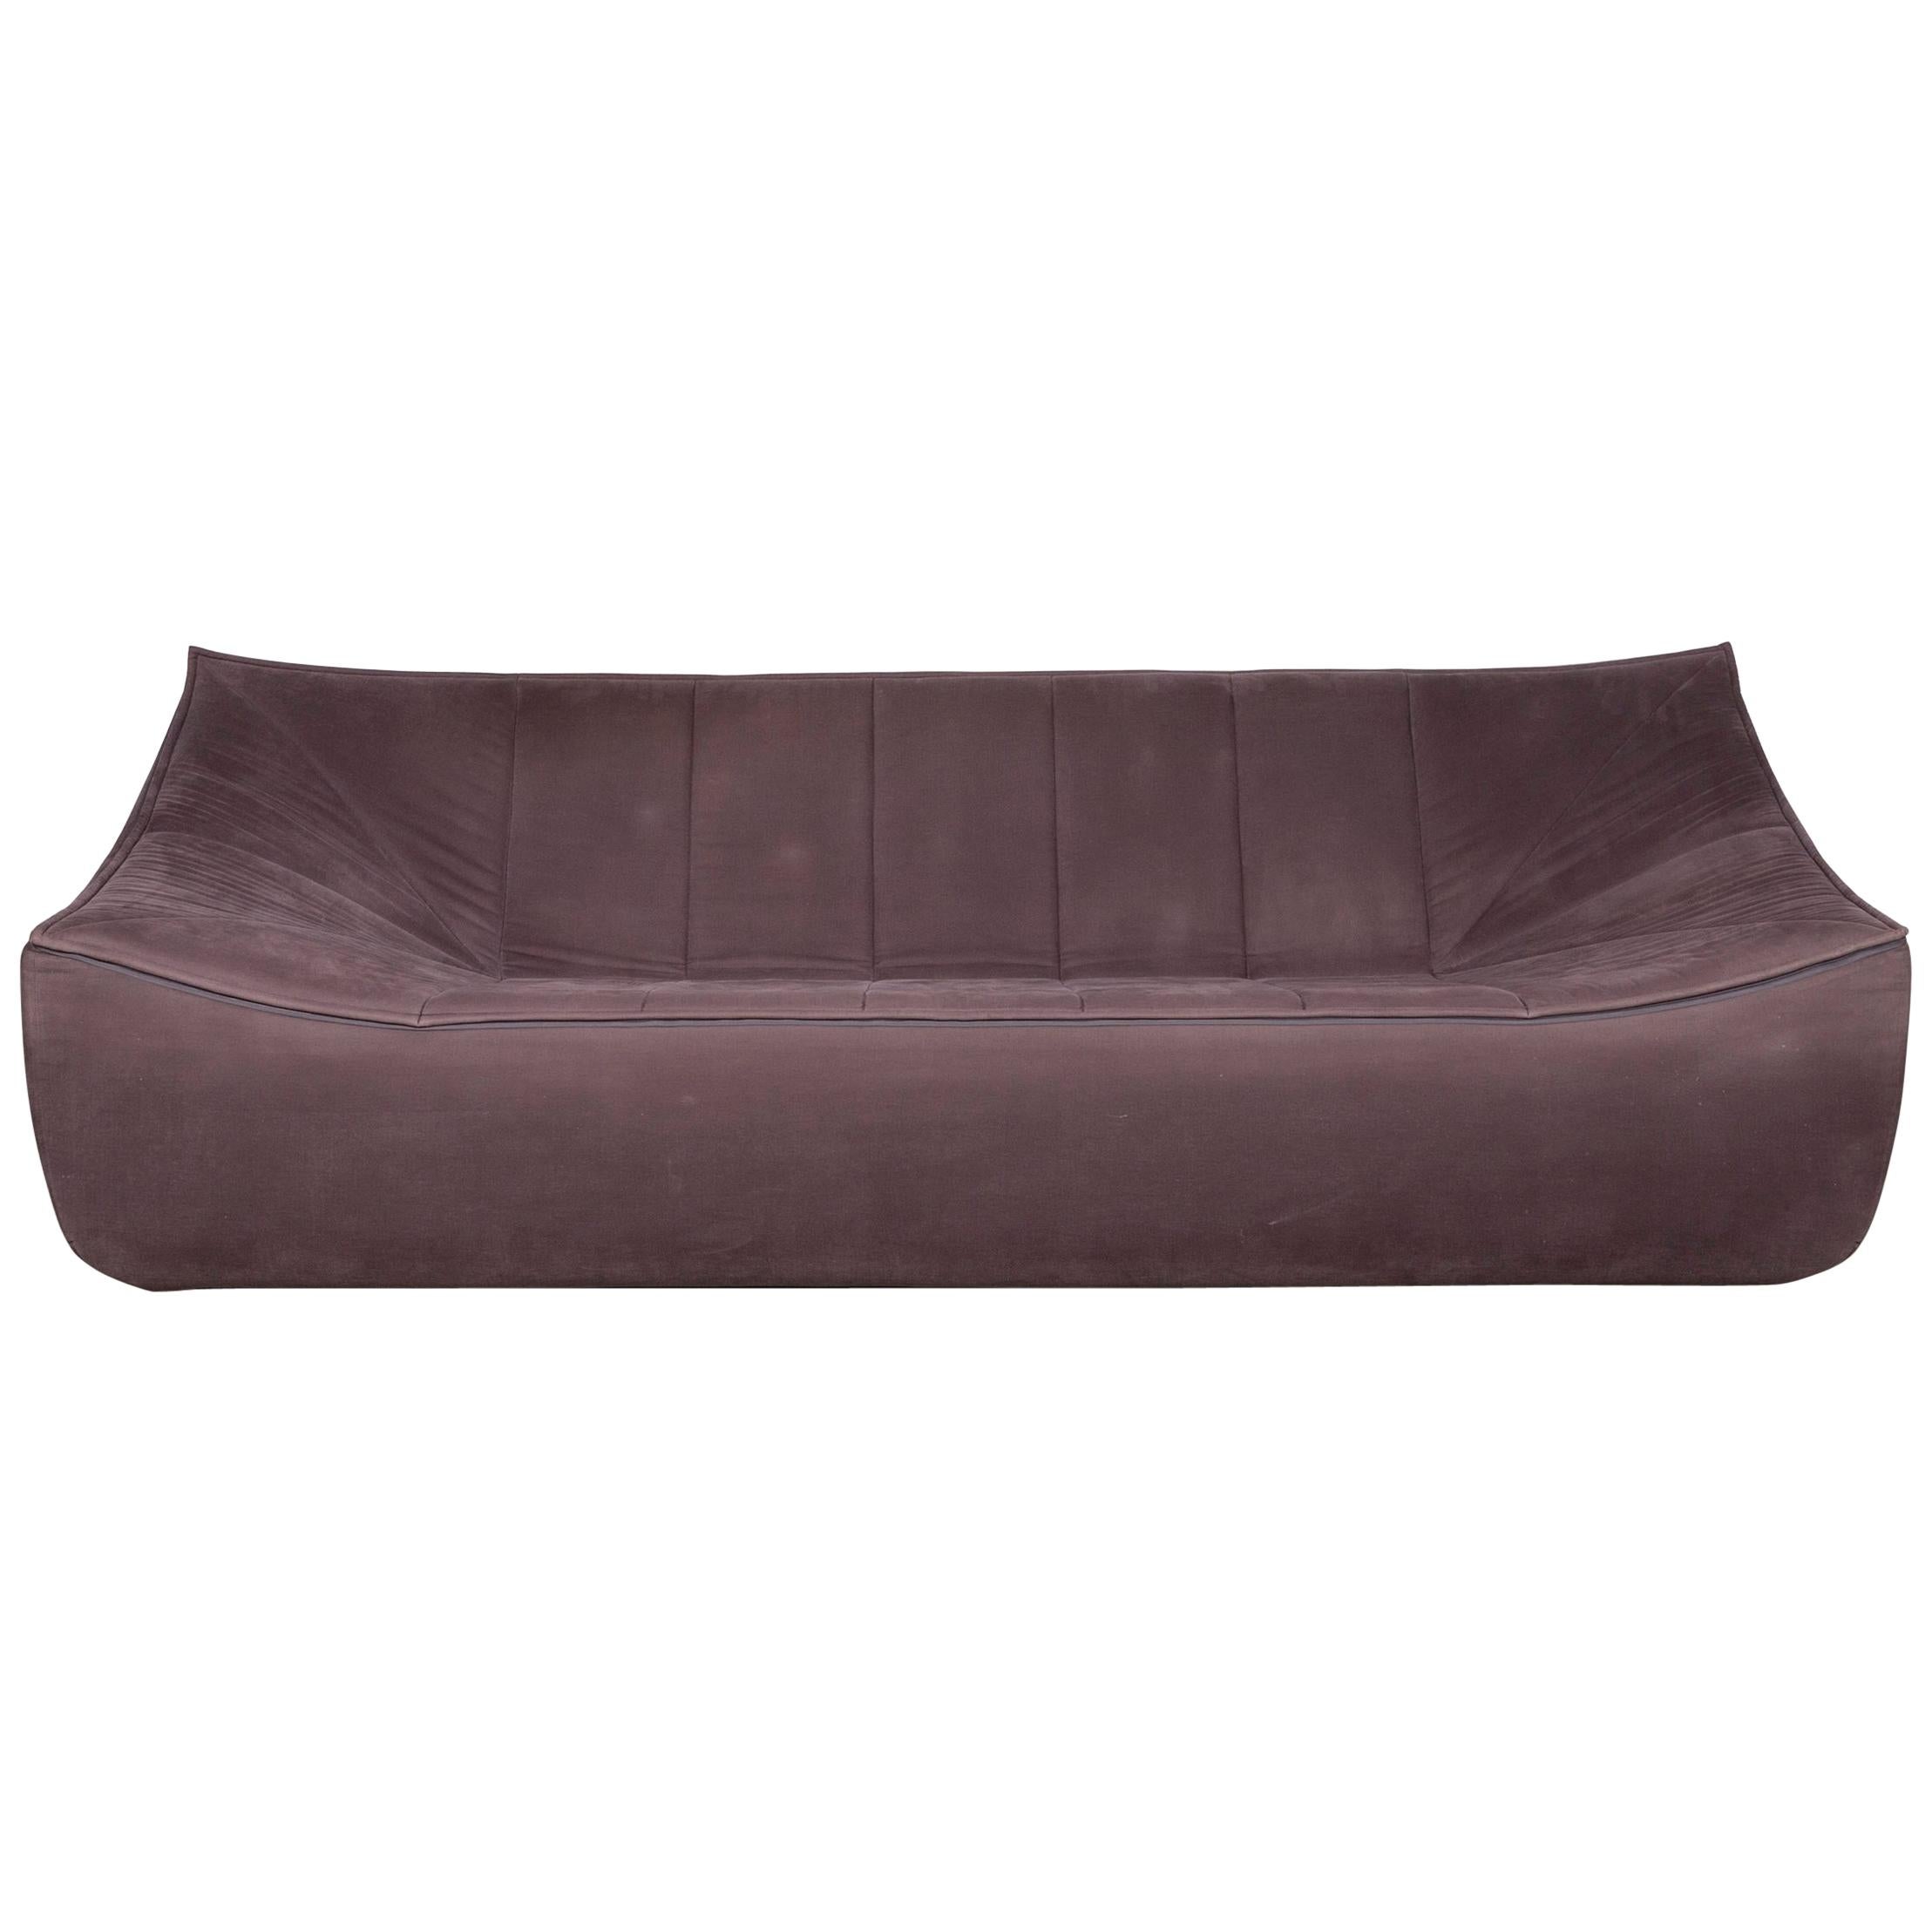 COR Bahir Designer Fabric Sofa Brown Three-Seat Couch For Sale